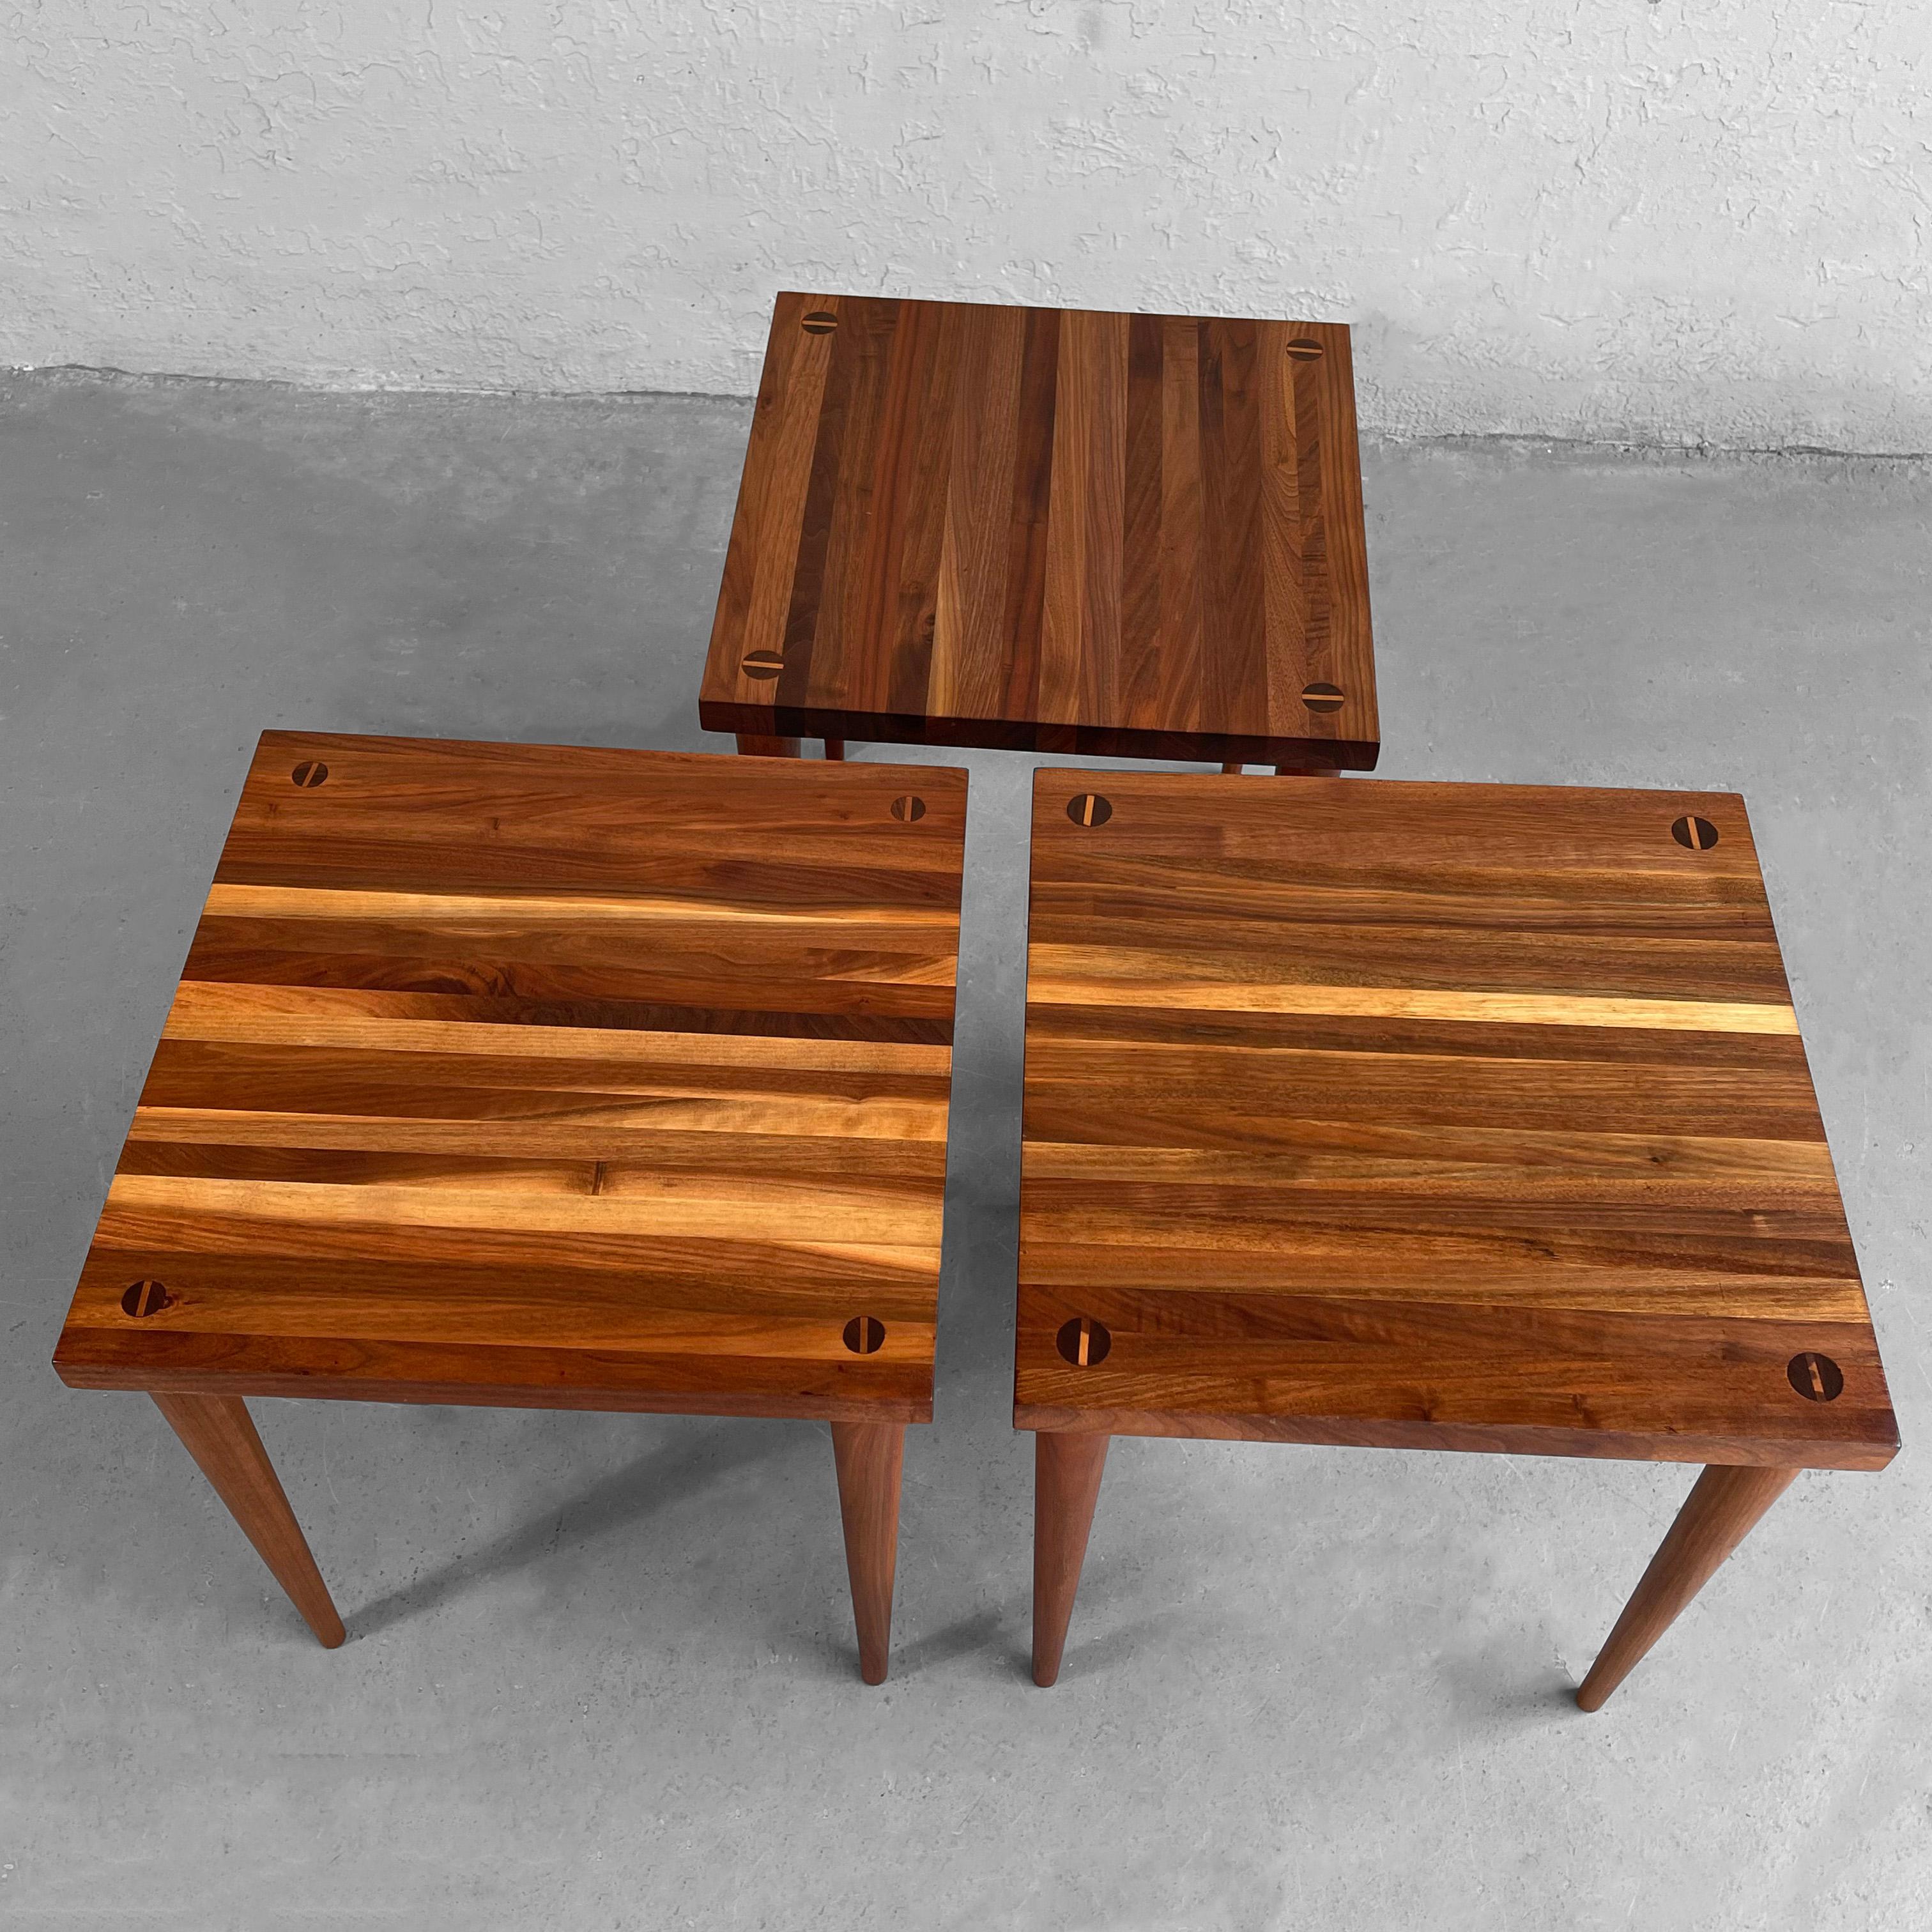 Trio of Mid-Century Modern Stacking Tables by Mel Smilow For Sale 3